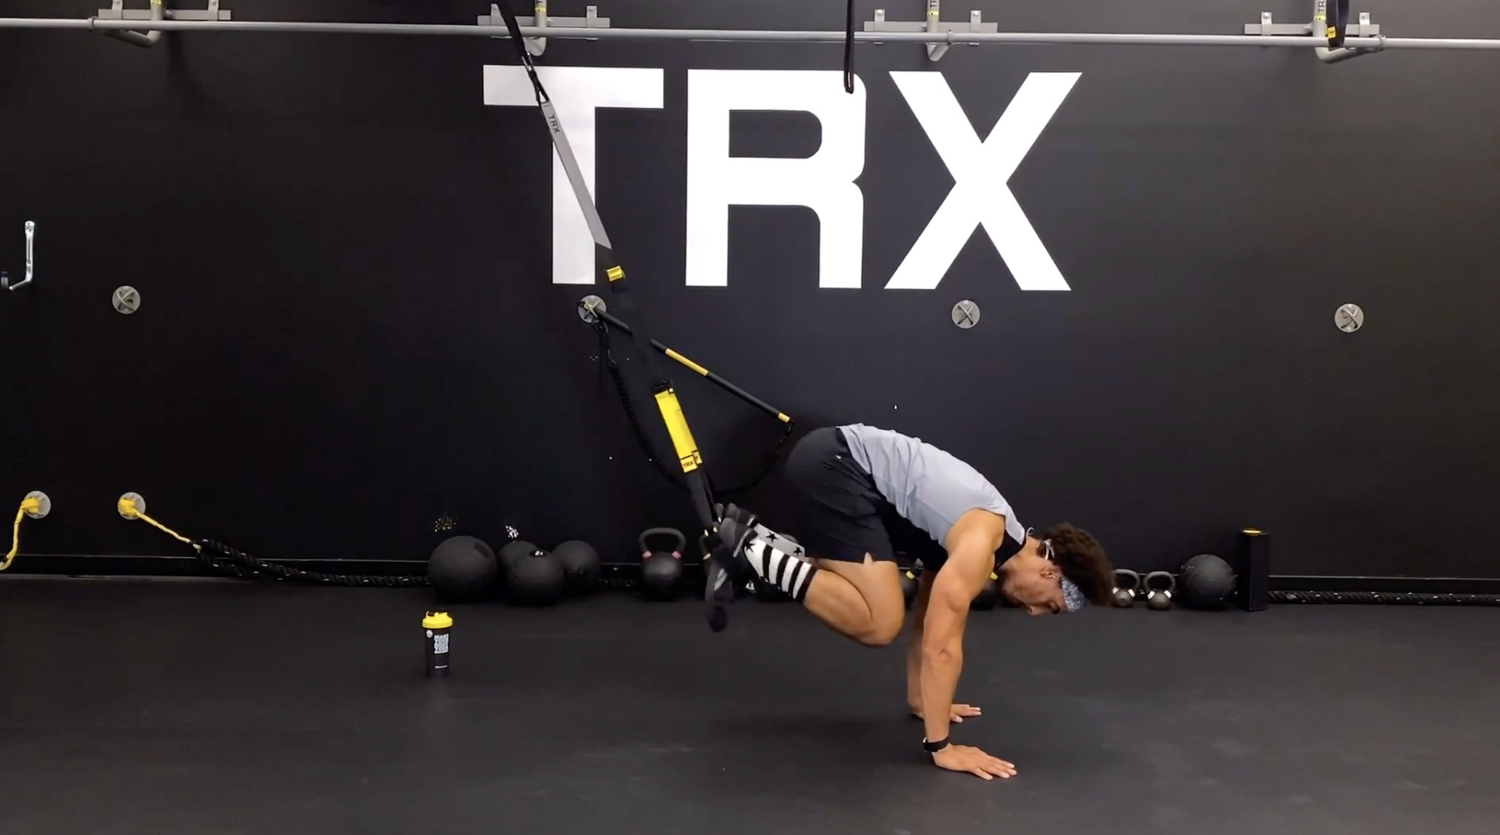 TRX MOVES OF THE WEEK: THE BASICS